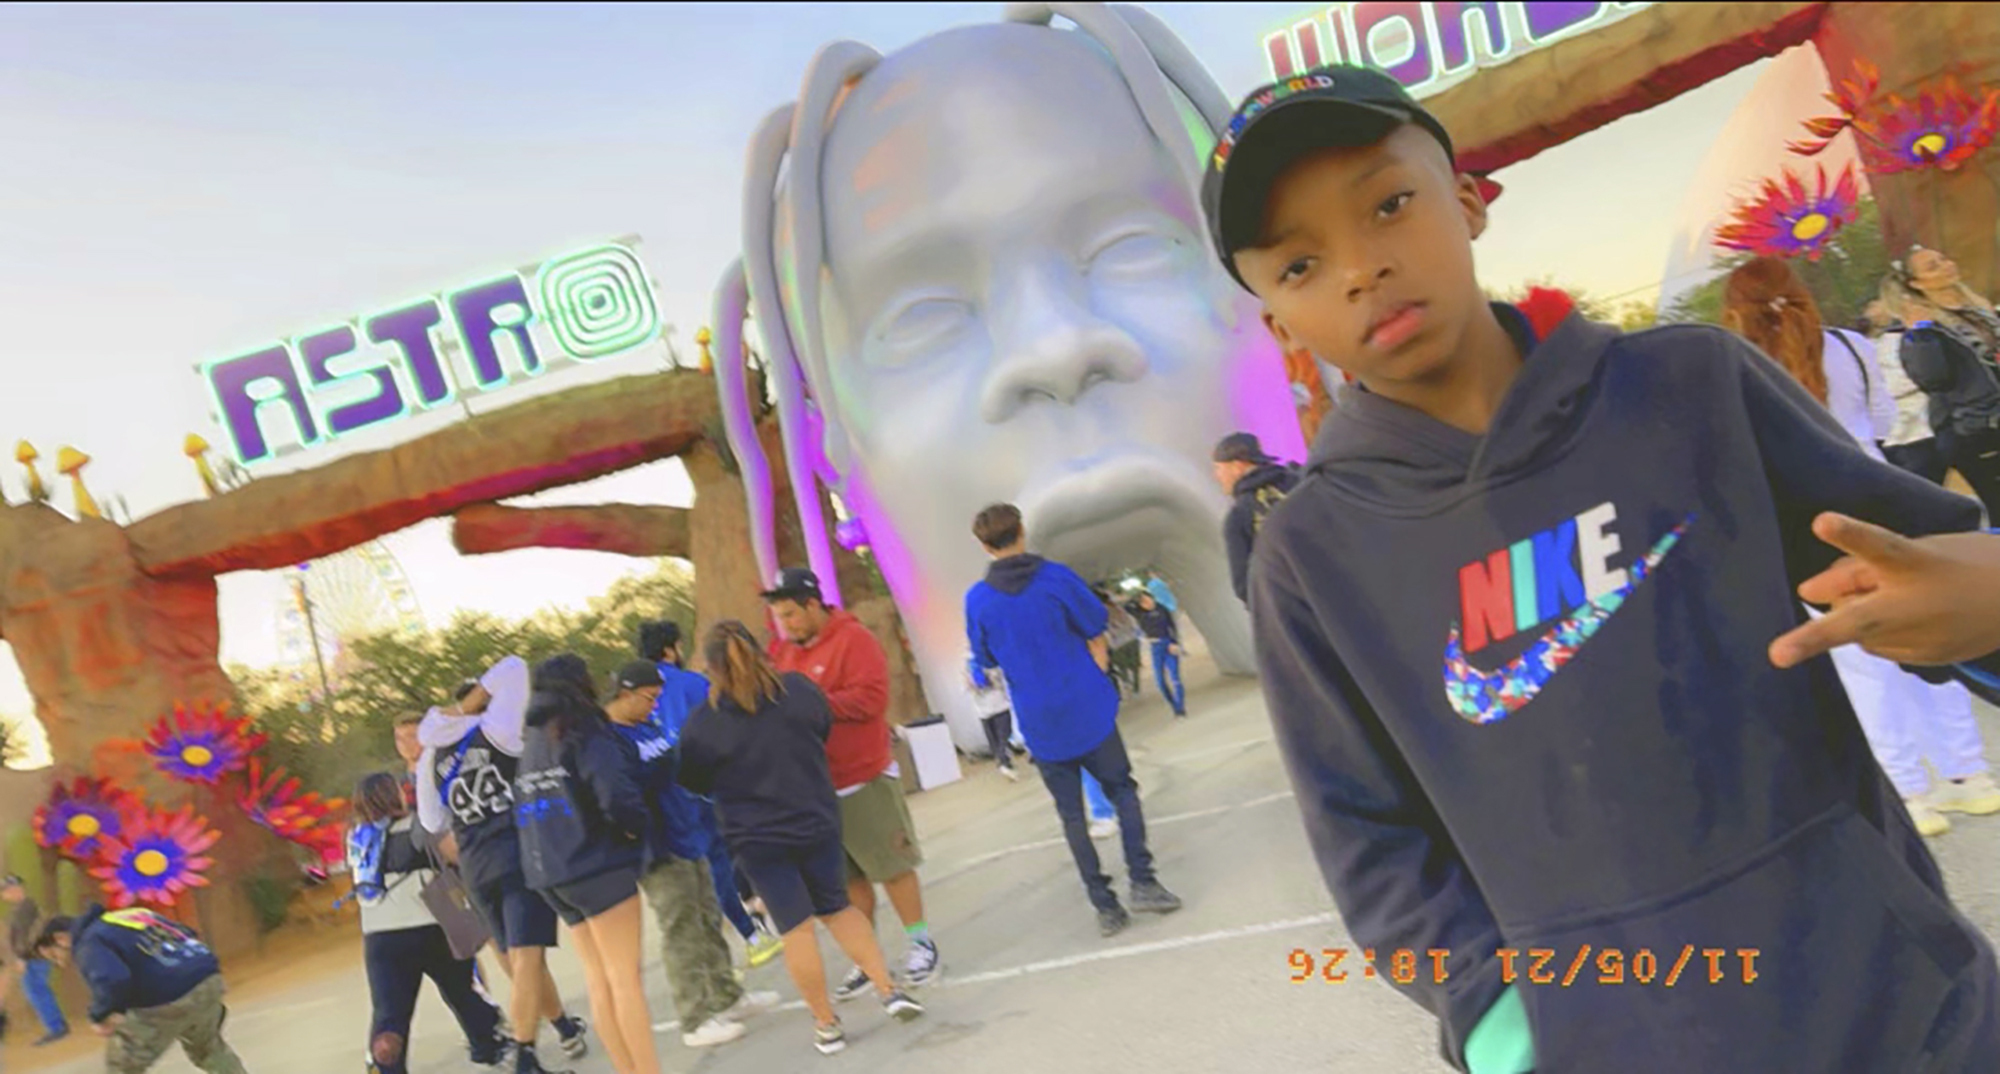 This photo provided by Taylor Blount shows Ezra Blount, 9, posing outside the Astroworld music festival in Houston on Nov. 5, 2021. Ezra has become the youngest person to die from injuries sustained during a crowd surge at the Astroworld music festival. Ezra, of Dallas, died Sunday, Nov. 14 at Texas Children’s Hospital in Houston, family attorney Ben Crump said. (Courtesy of Taylor Blount via AP)